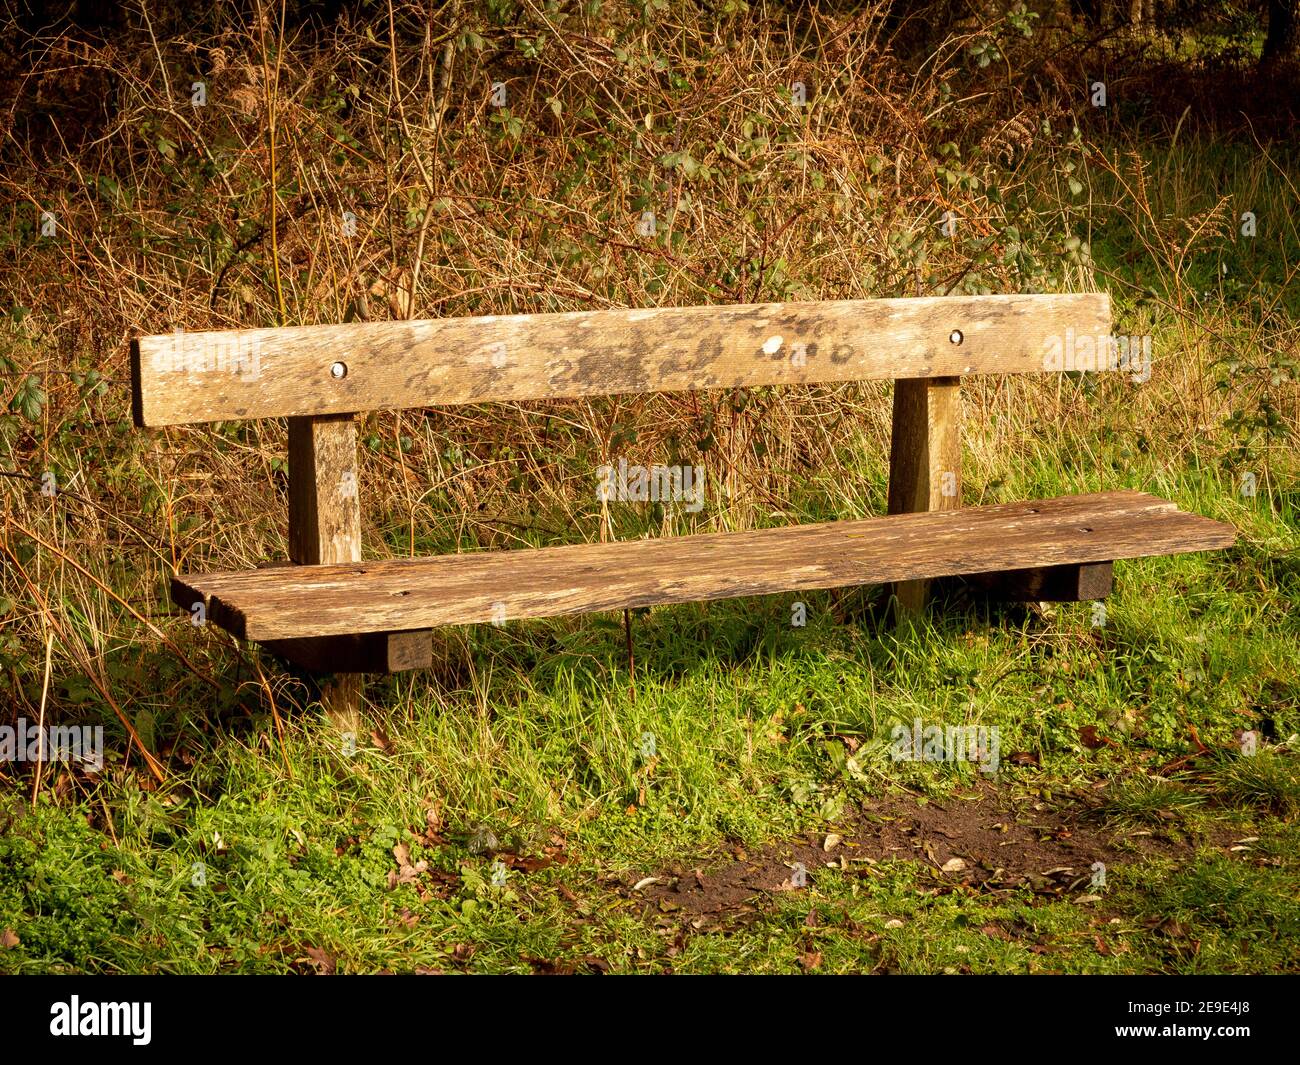 Simple wooden bench, seat outside on grass with brambles behind Stock Photo